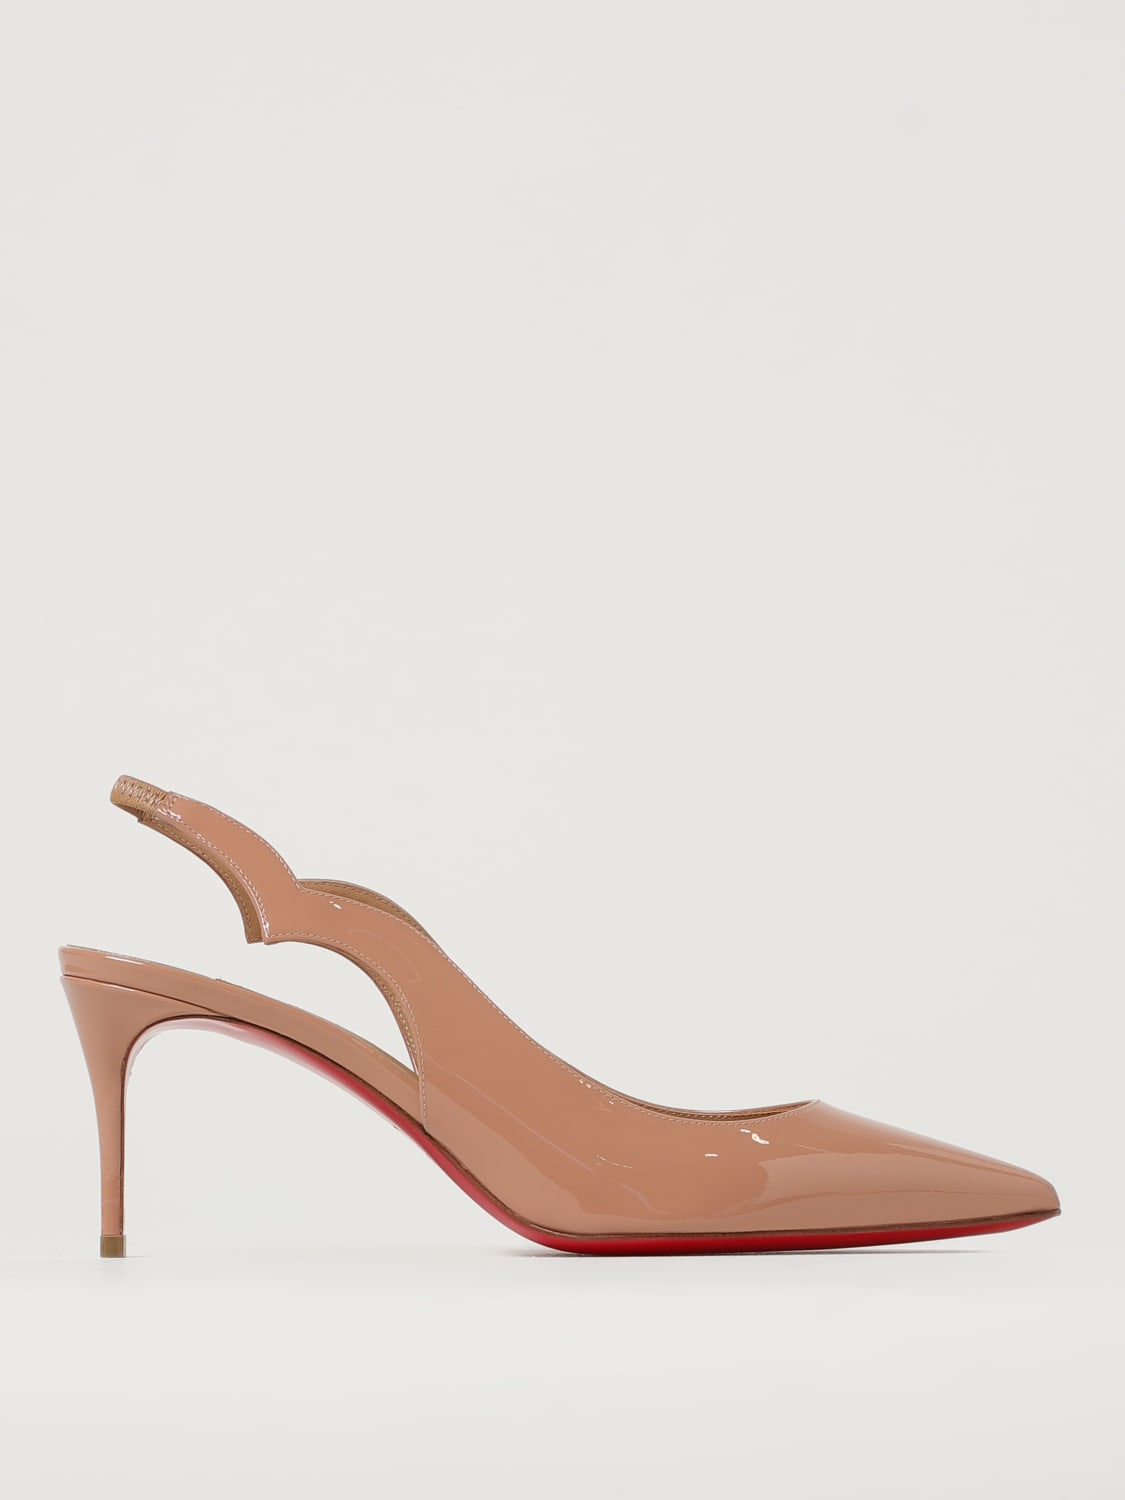 CHRISTIAN LOUBOUTIN: Hot Chick sligbacks in patent leather - Nude | Christian Louboutin high heel shoes at